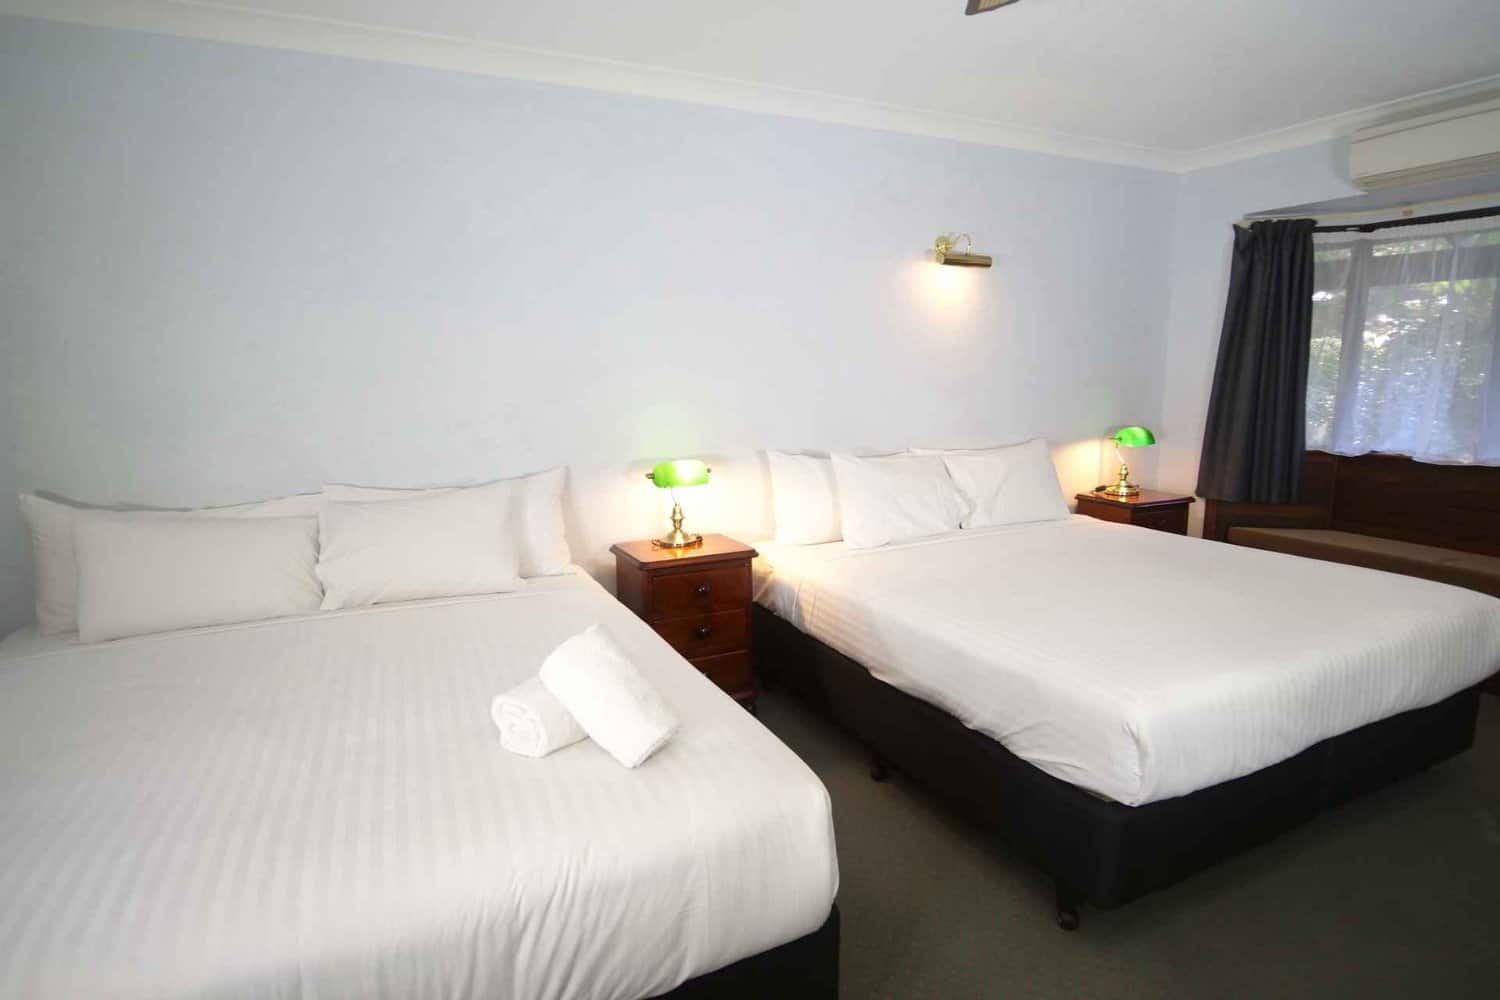 Spacious hotel room featuring two king size beds, side tables with lamps for added comfort, and a window with open curtains allowing natural light to fill the space, inviting guests to consider an extended stay